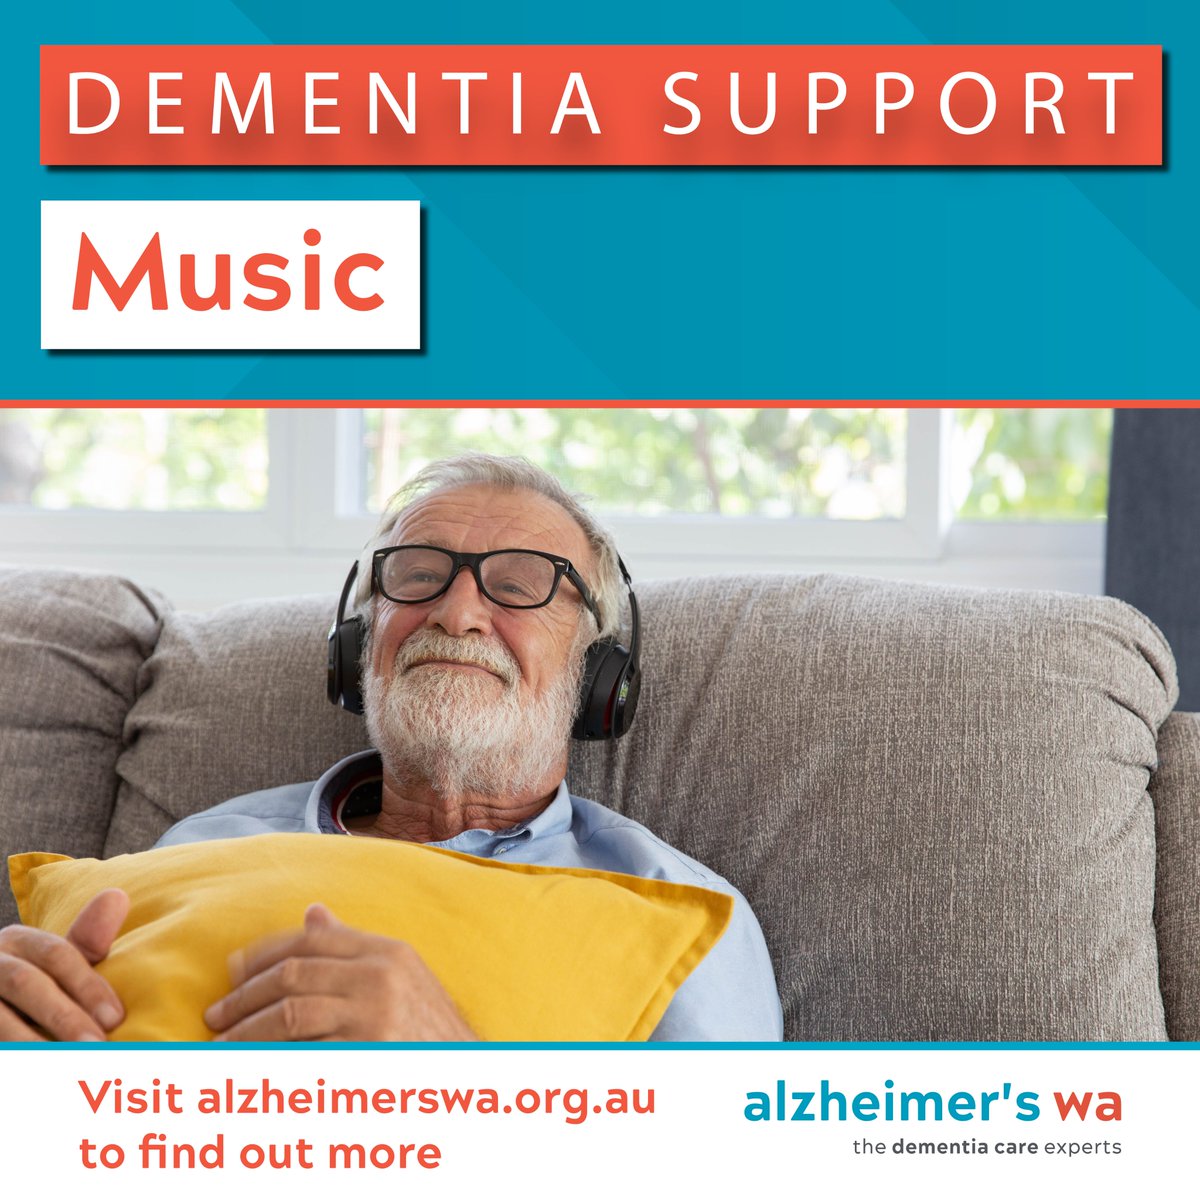 Music often comforts, sooths and stimulates us. These same effects apply greatly to people living with dementia. Music that reminds one of a simpler time can work wonders in helping them connect with their past. It also helps younger carers appreciate the sounds of yesteryear!